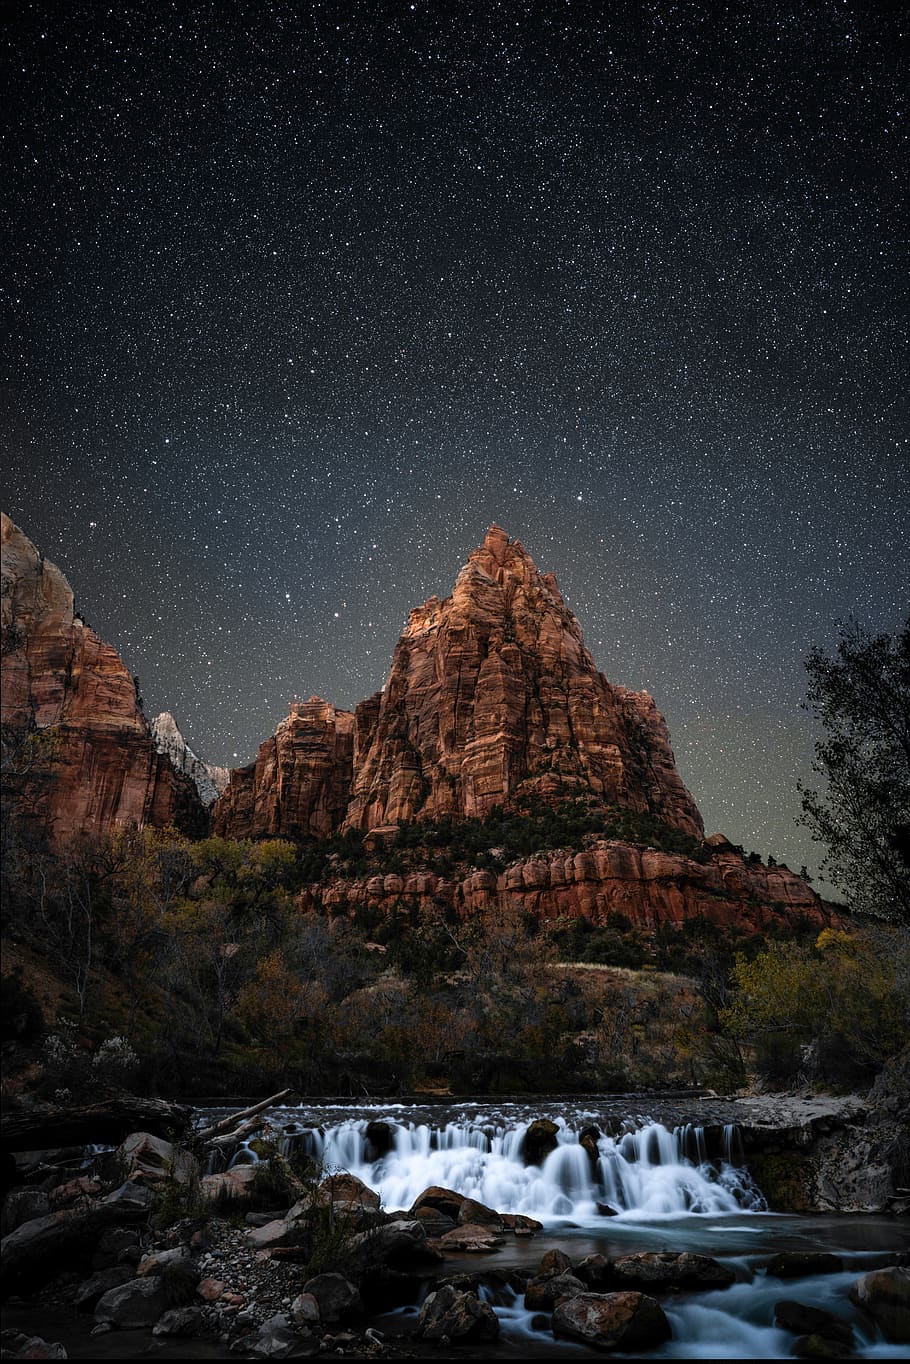 plateau and body of water at night, nature, outdoors, zion national park